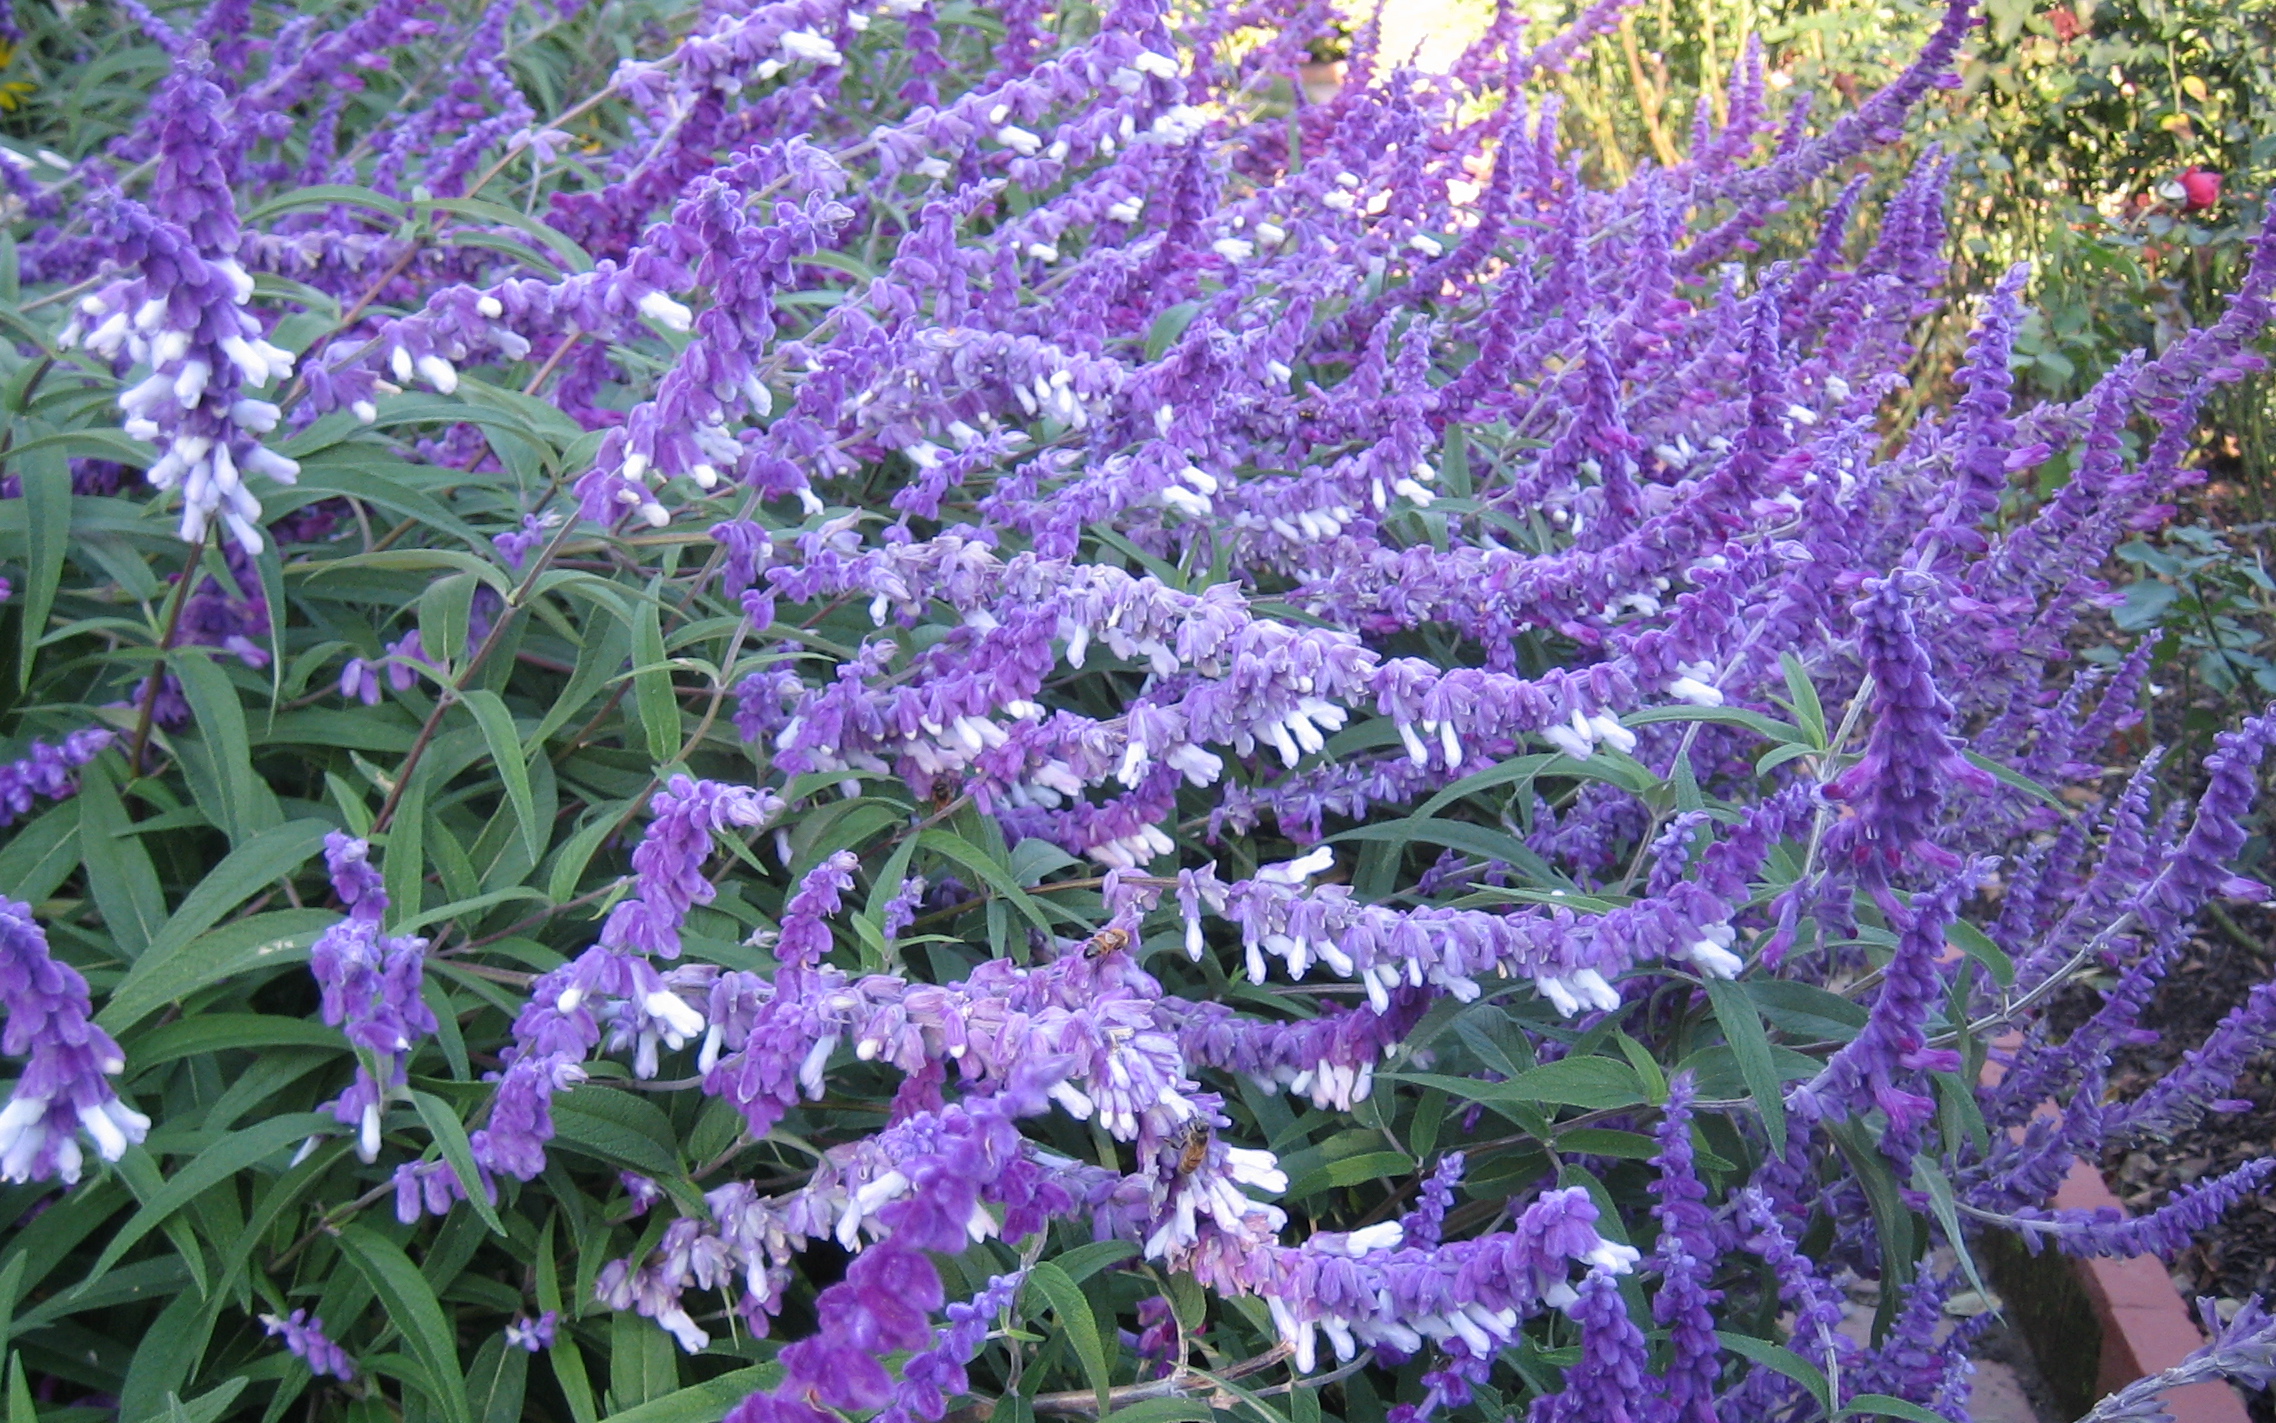 purple and white flowers with green stems in the garden